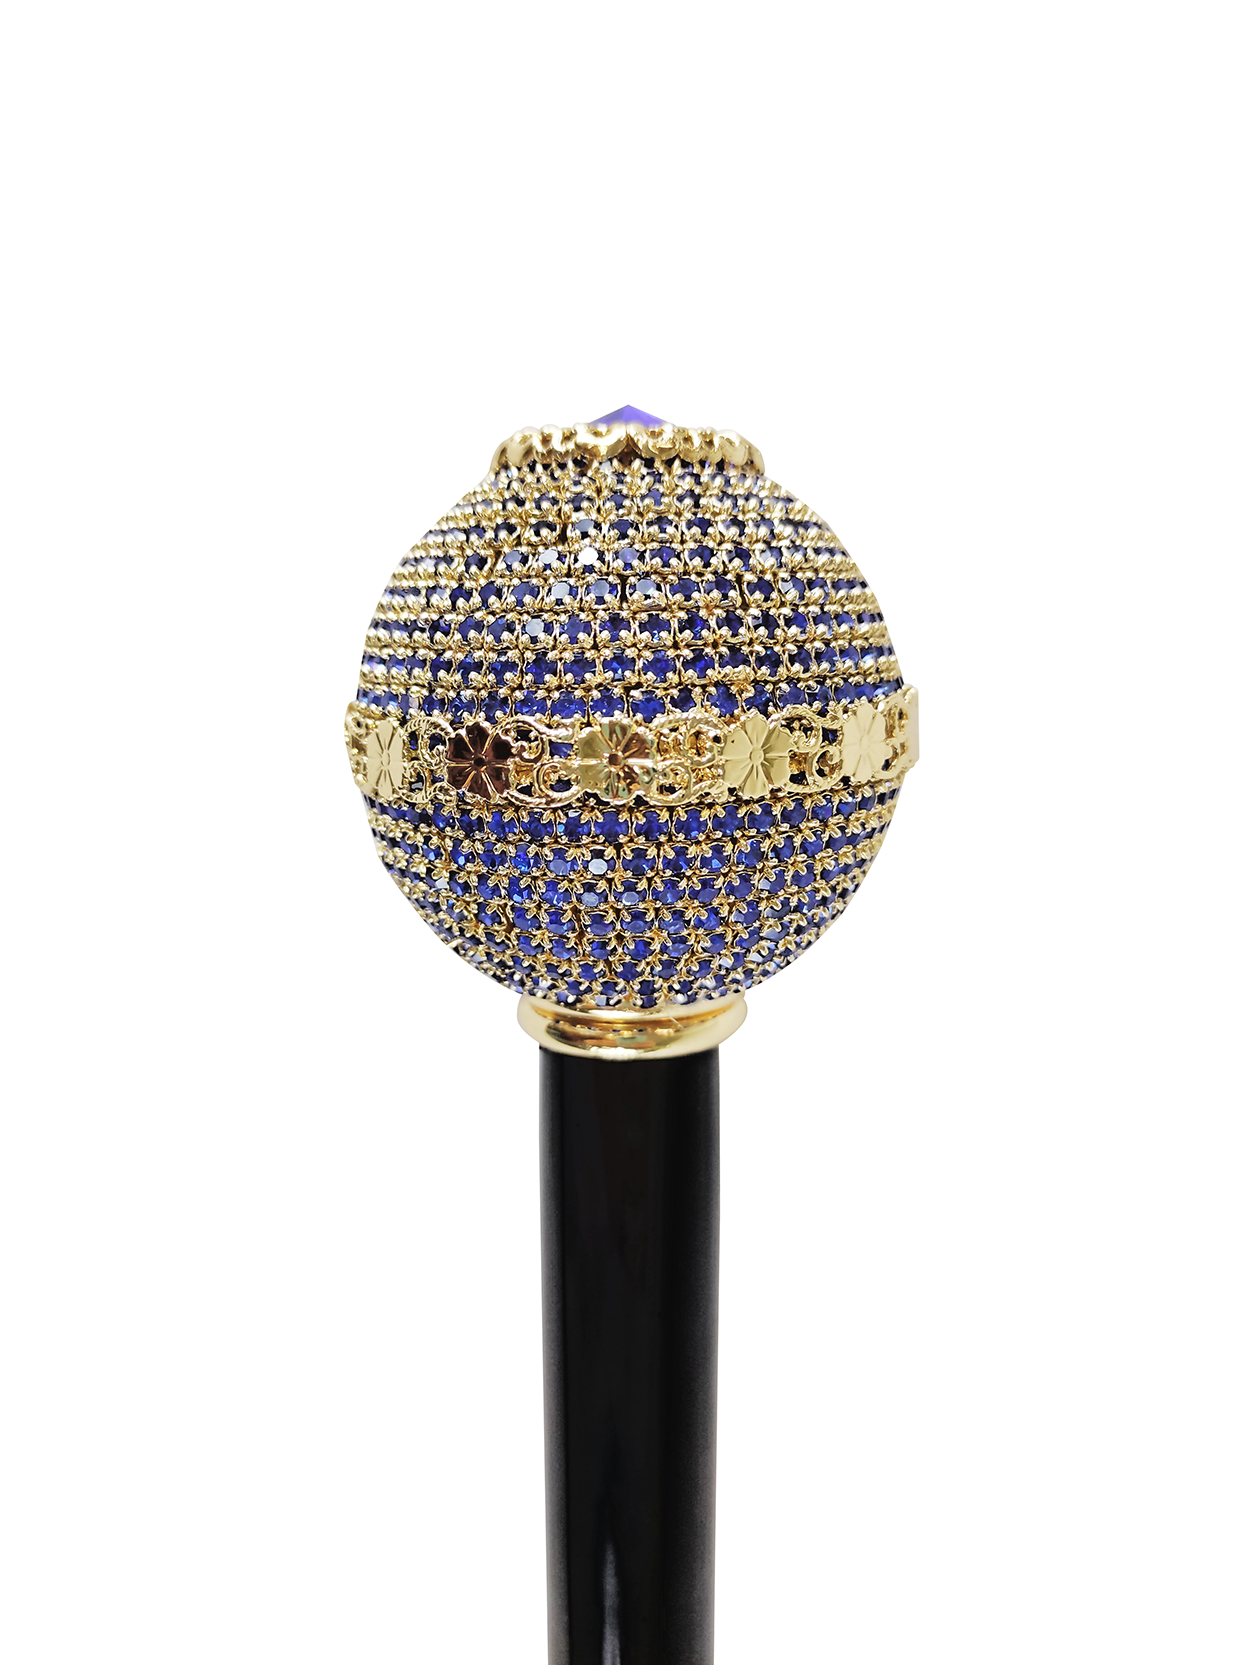 Luxurious Jeweled Walking Stick with Sapphire crystals